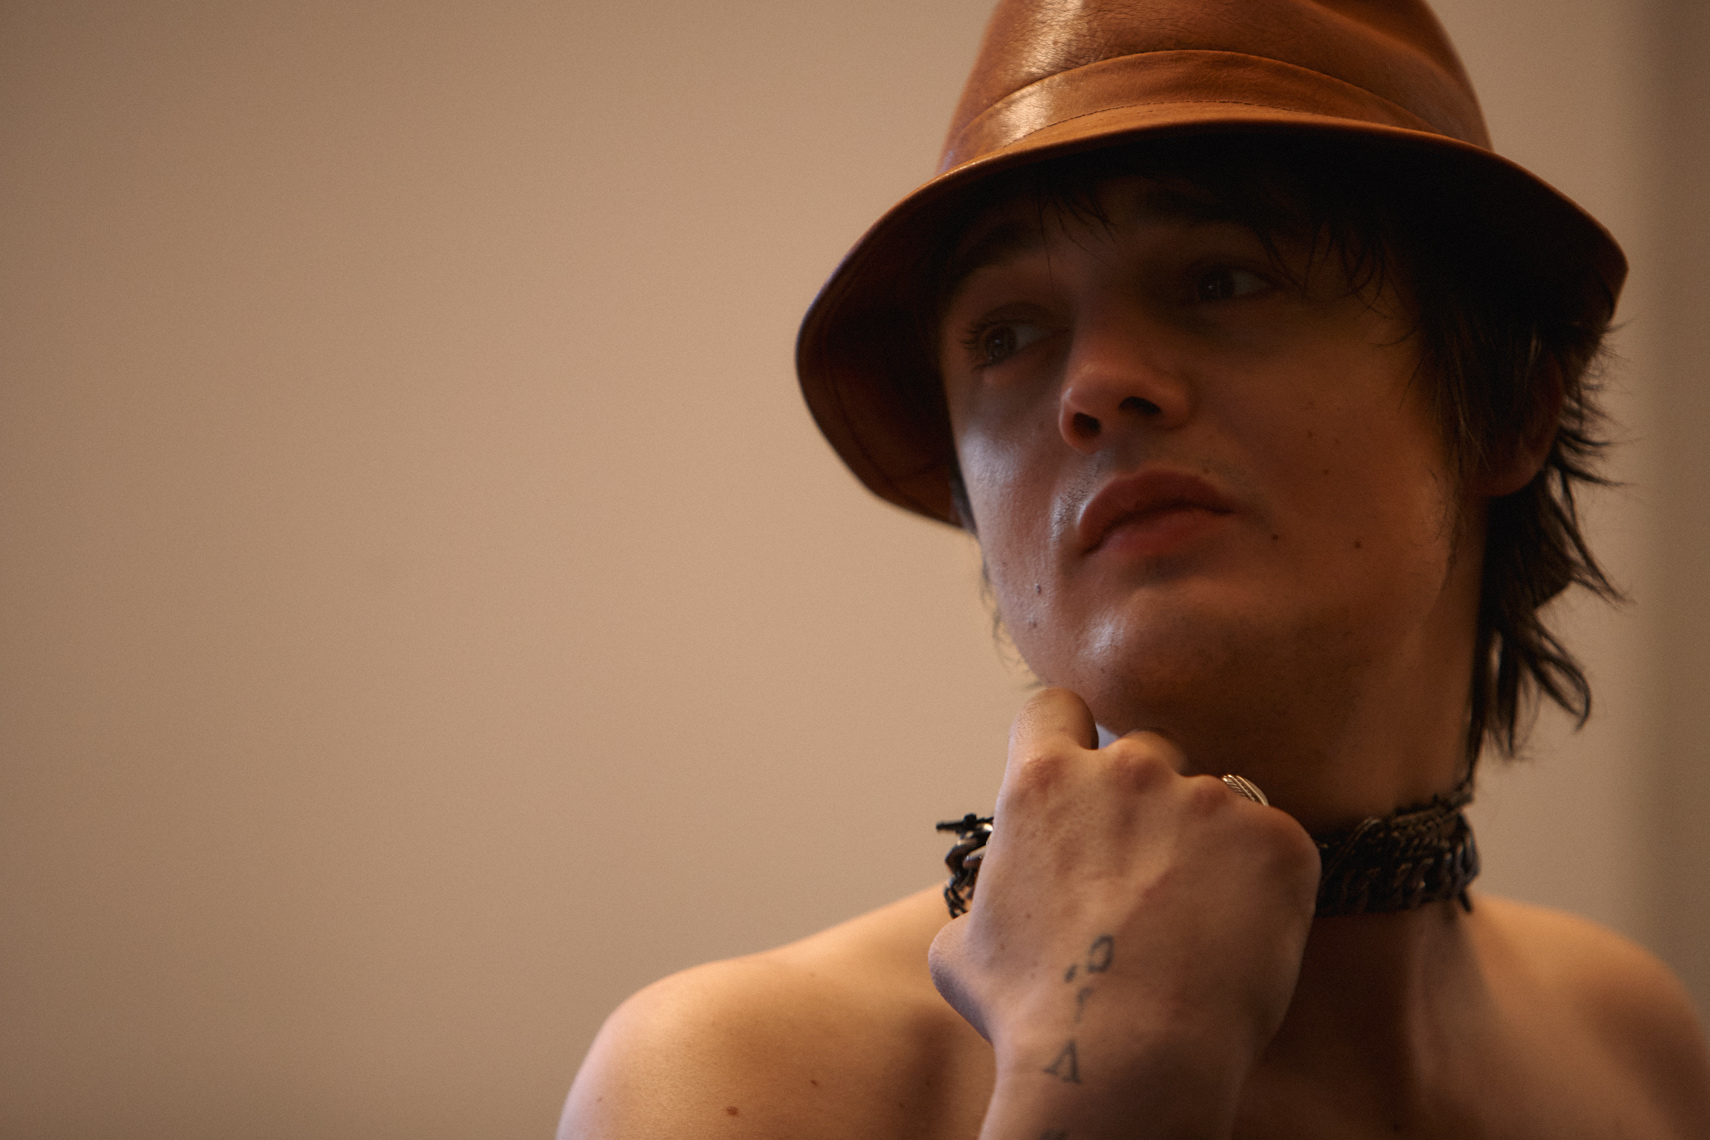 pete doherty photographed by tom oxley